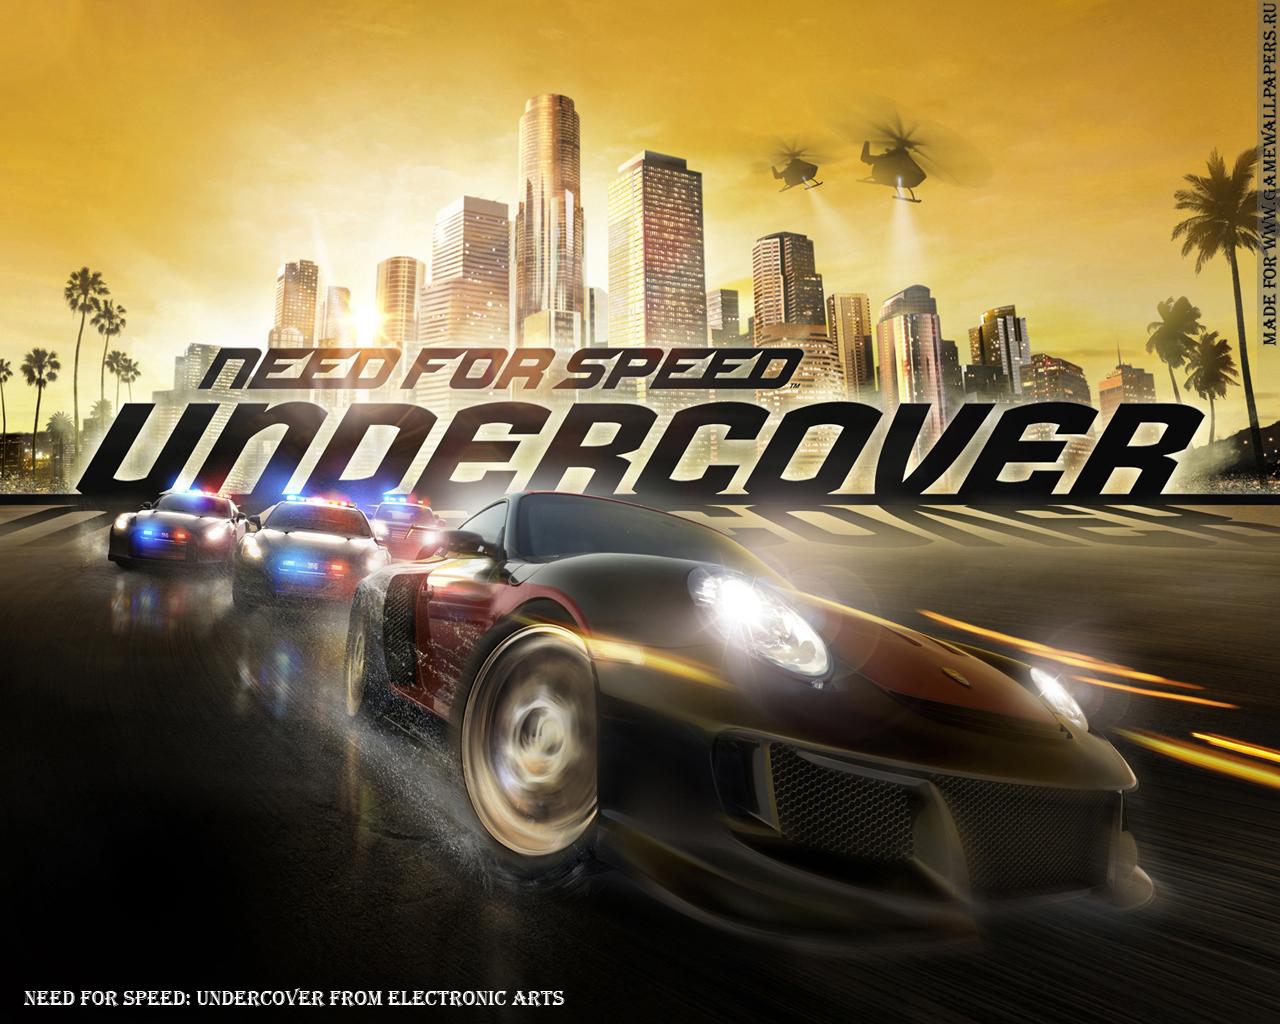 Games, Movies and Softwares: Need for speed undercover